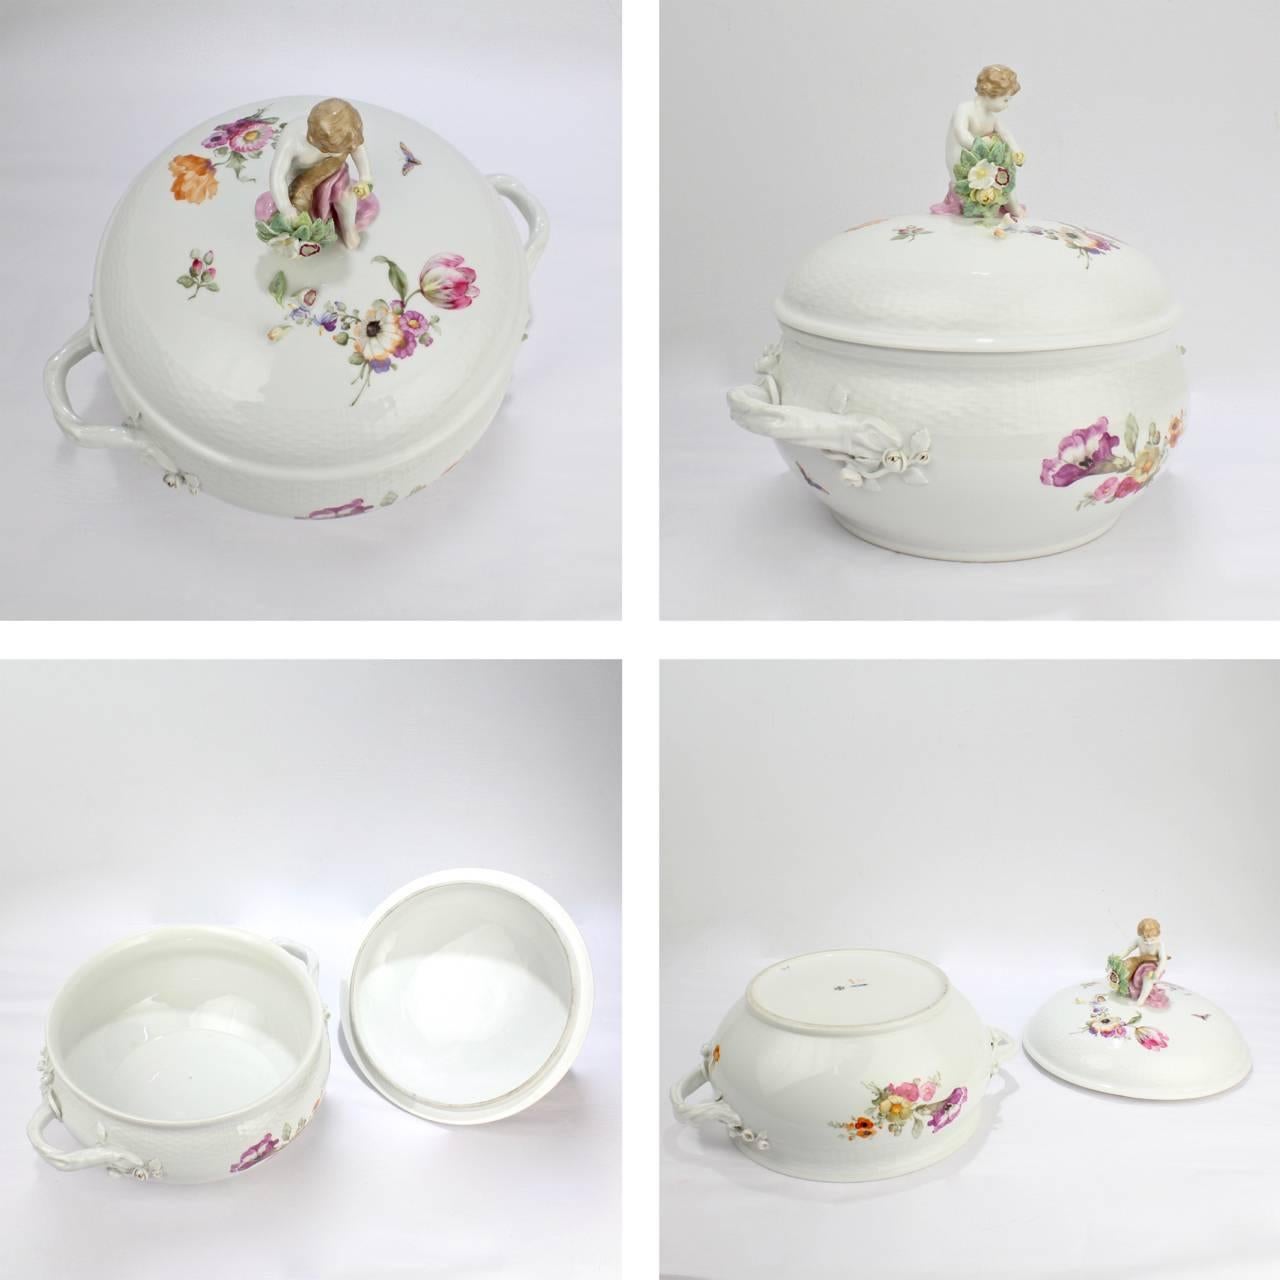 Antique KPM Royal Berlin Porcelain Hand-Painted Tureen with Cornucopia & Cherub In Good Condition For Sale In Philadelphia, PA